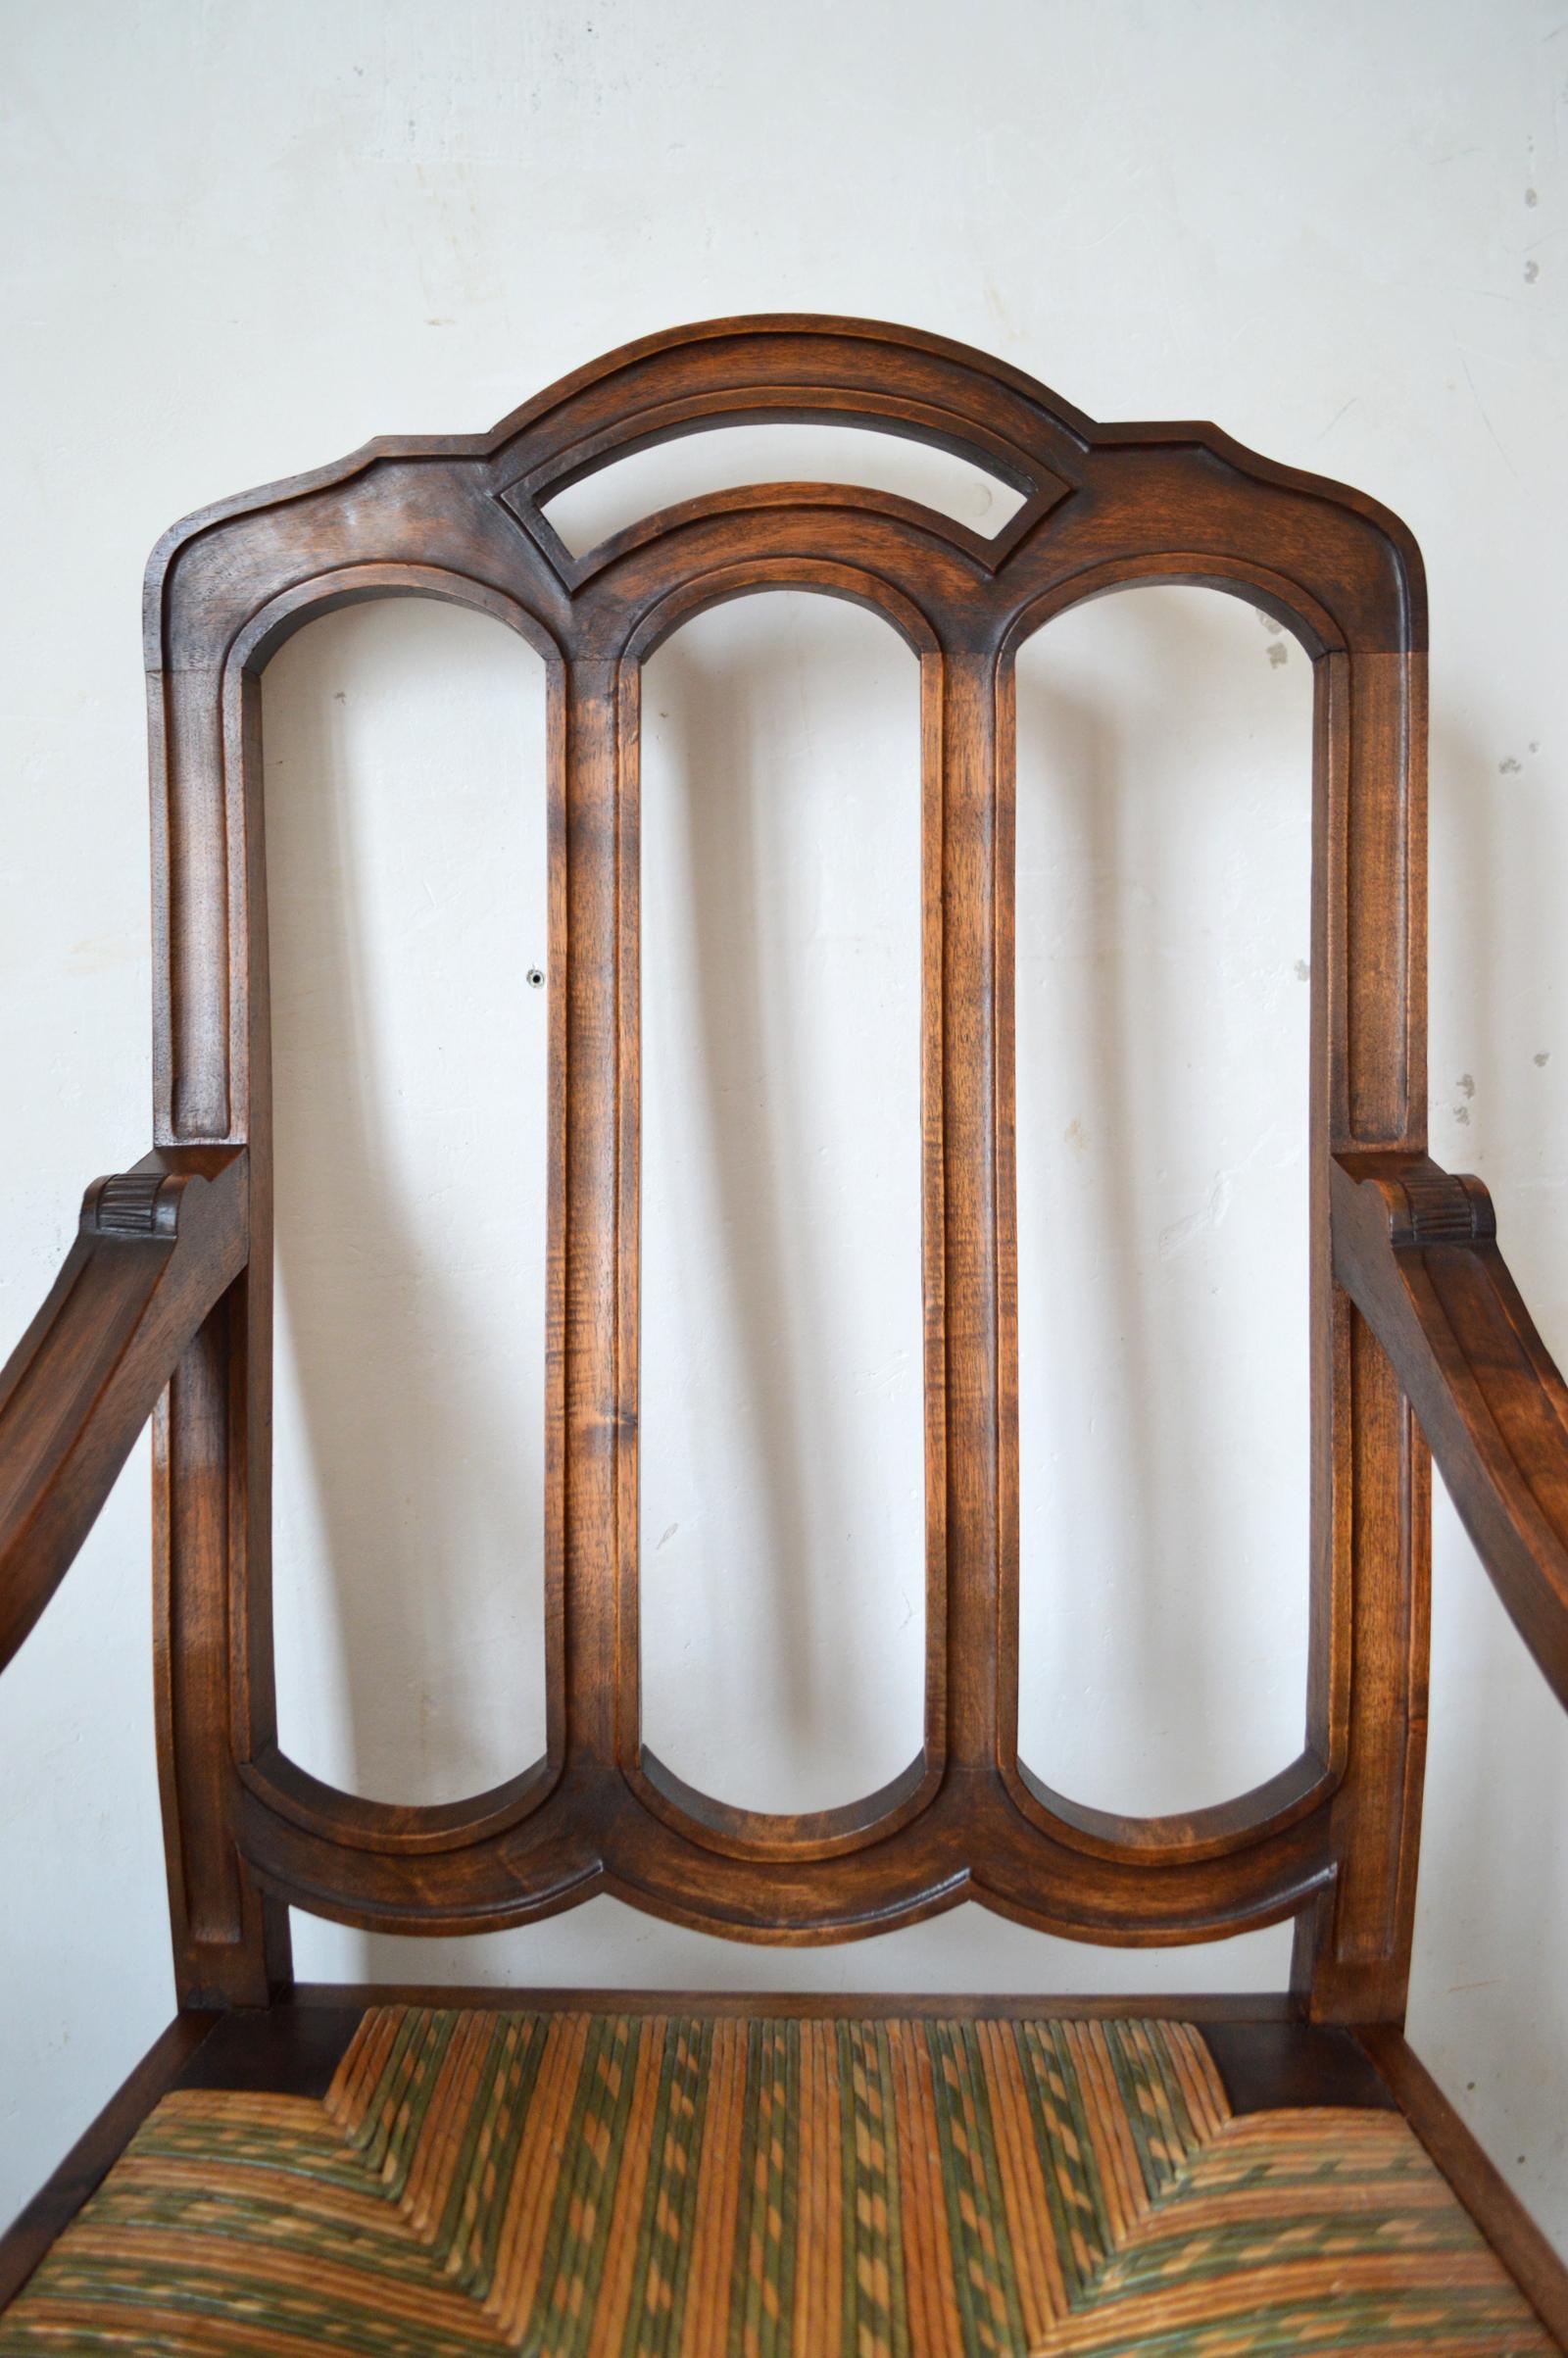 Pair of French Gothic Revival Rush Seat Armchairs in Walnut, circa 1890 For Sale 2